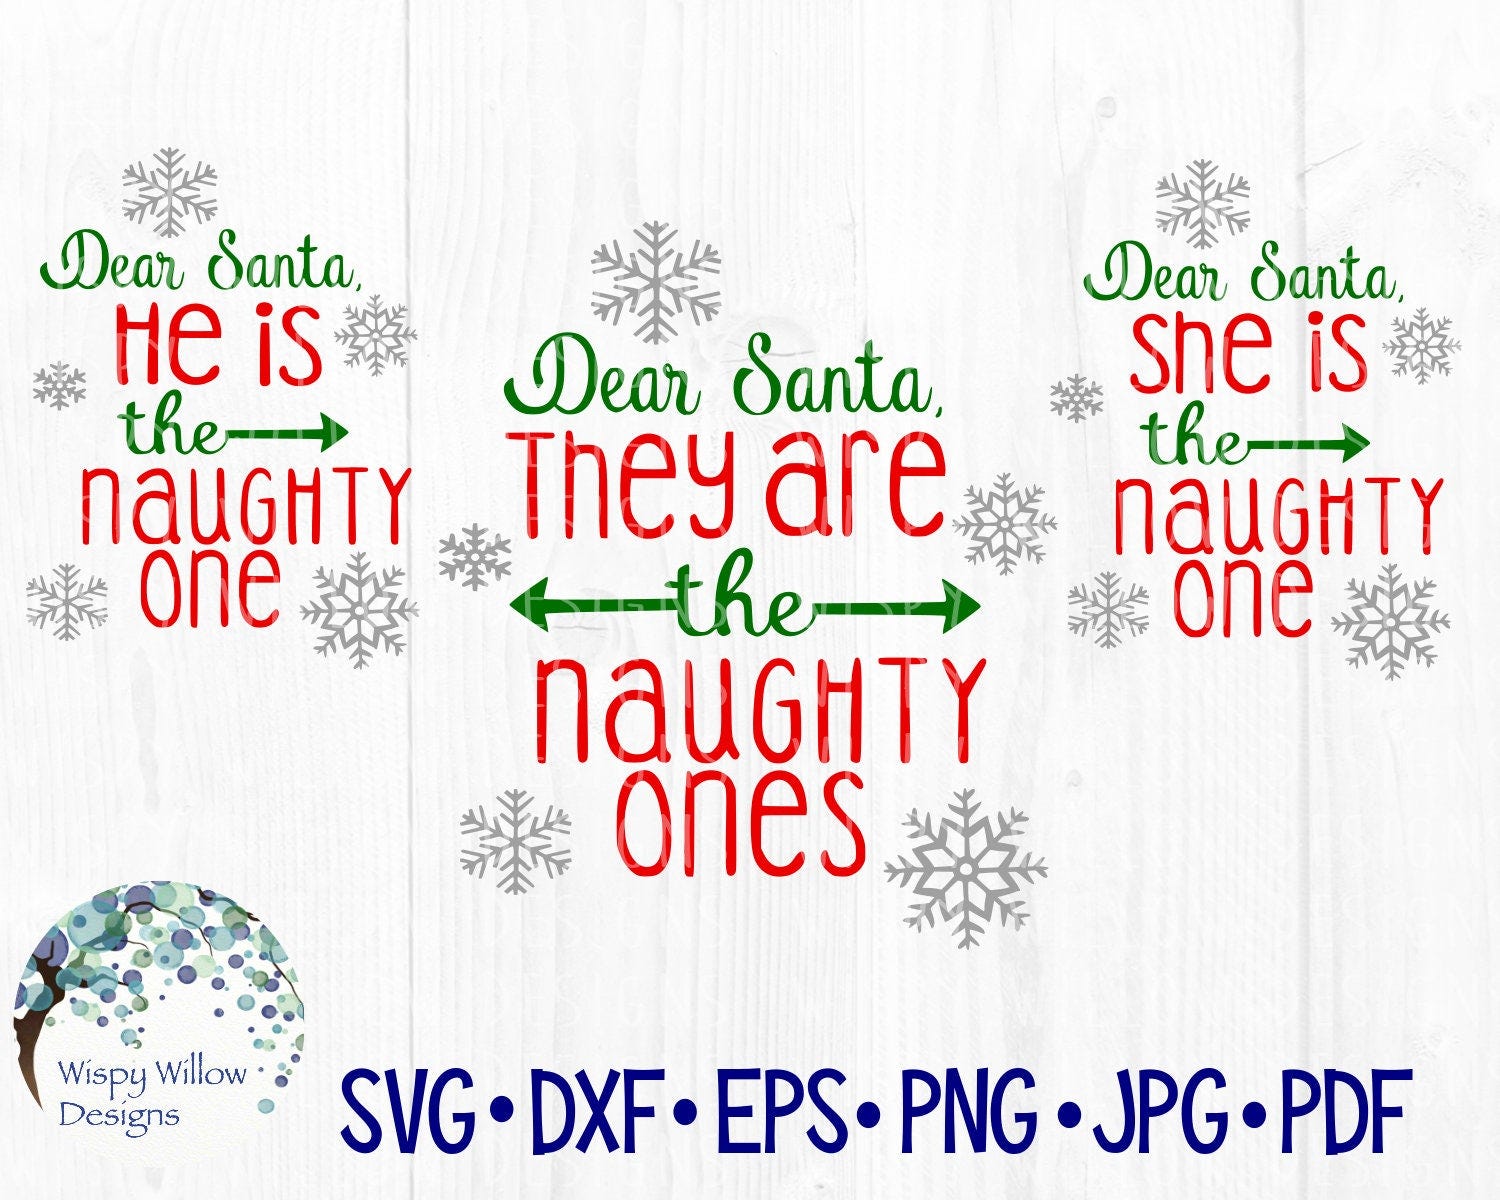 Dear Santa, He is the Naughty One, She is the Naughty One, They Are the Naughty Ones, SVG, DXF, png, jpg, Christmas, Cut File, Funny, Shirt